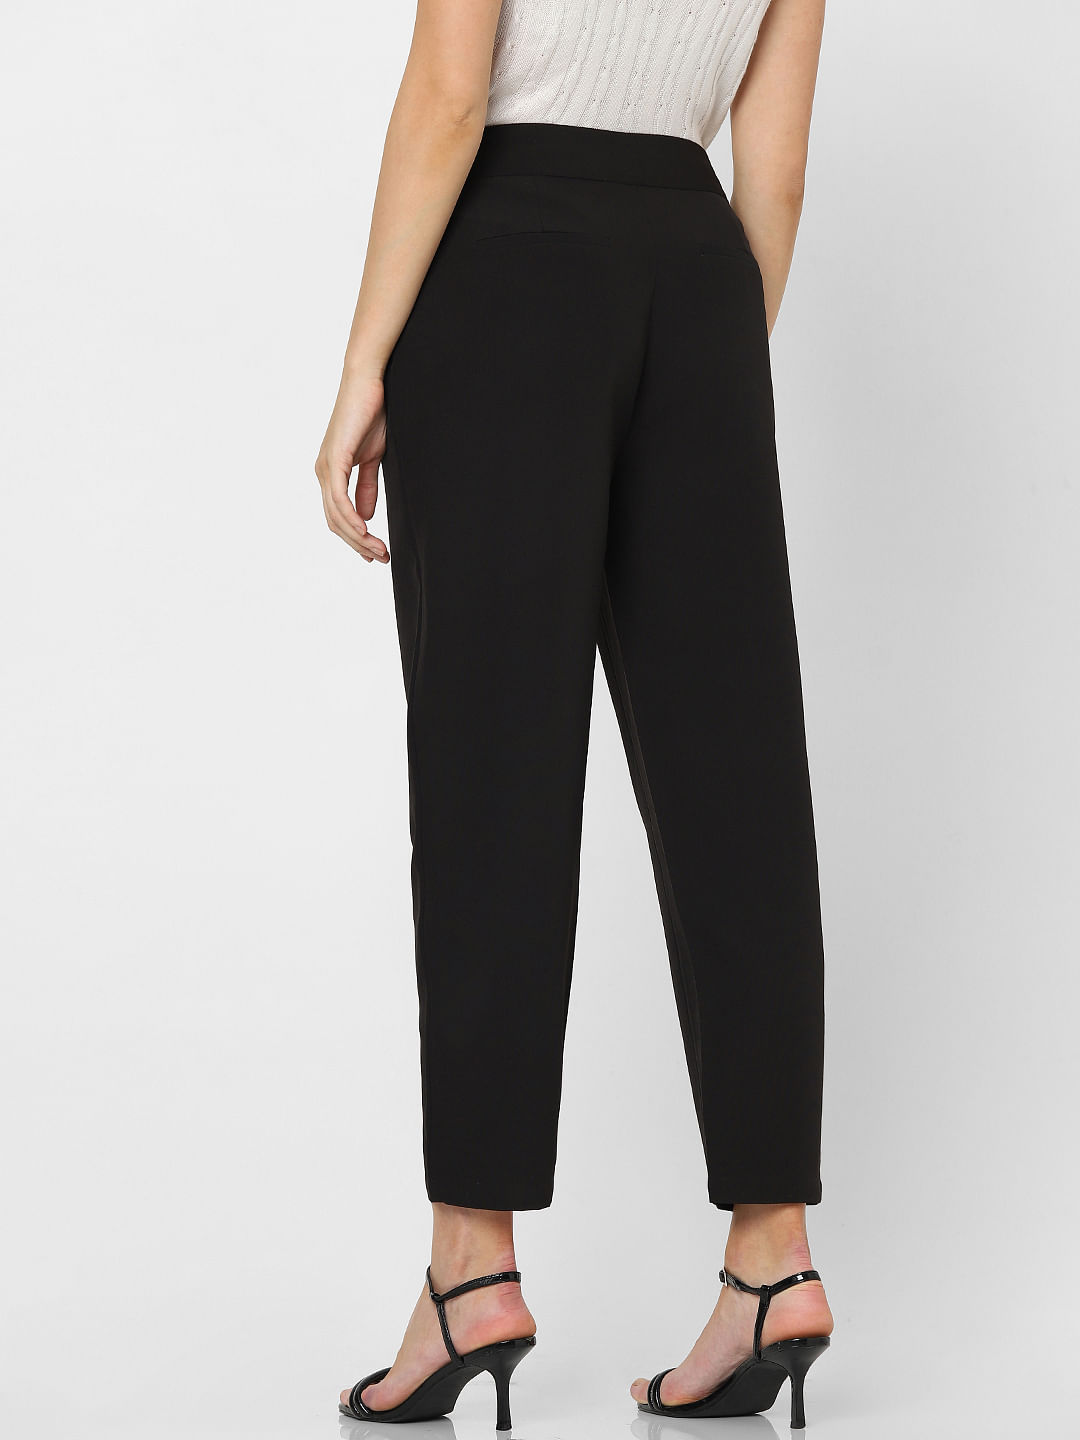 High Rise Button Pants in Black 3X | DAILYLOOK